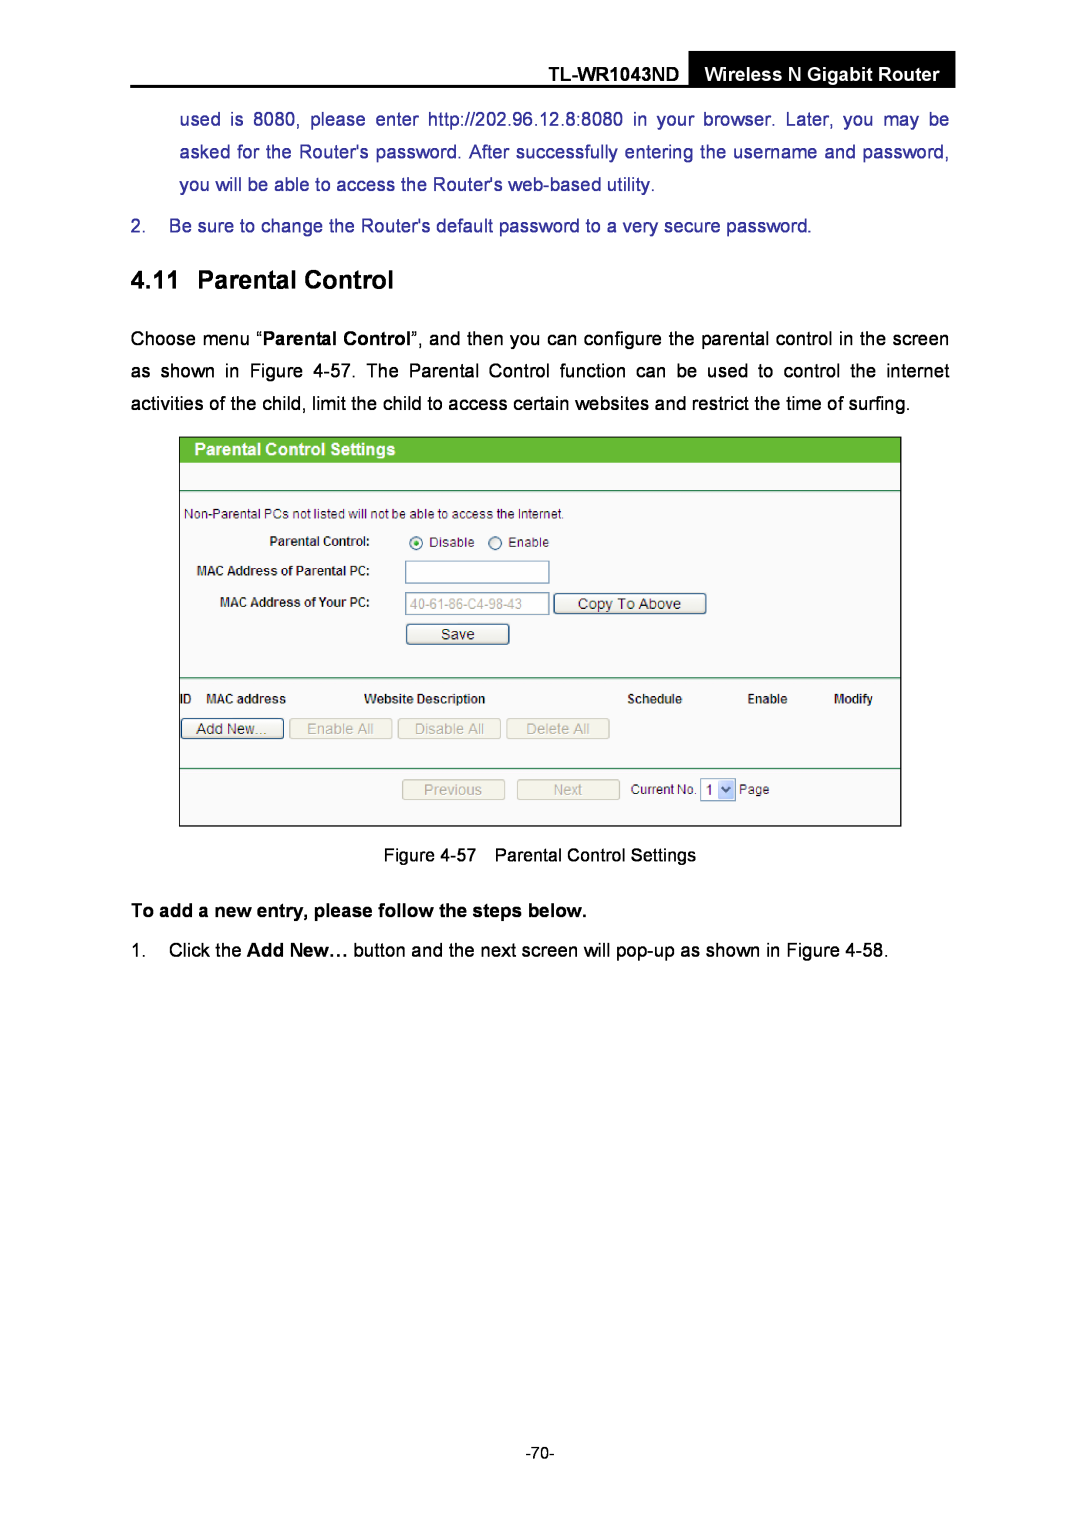 TP-Link TL-WR1043ND manual Parental Control, To add a new entry, please follow the steps below 